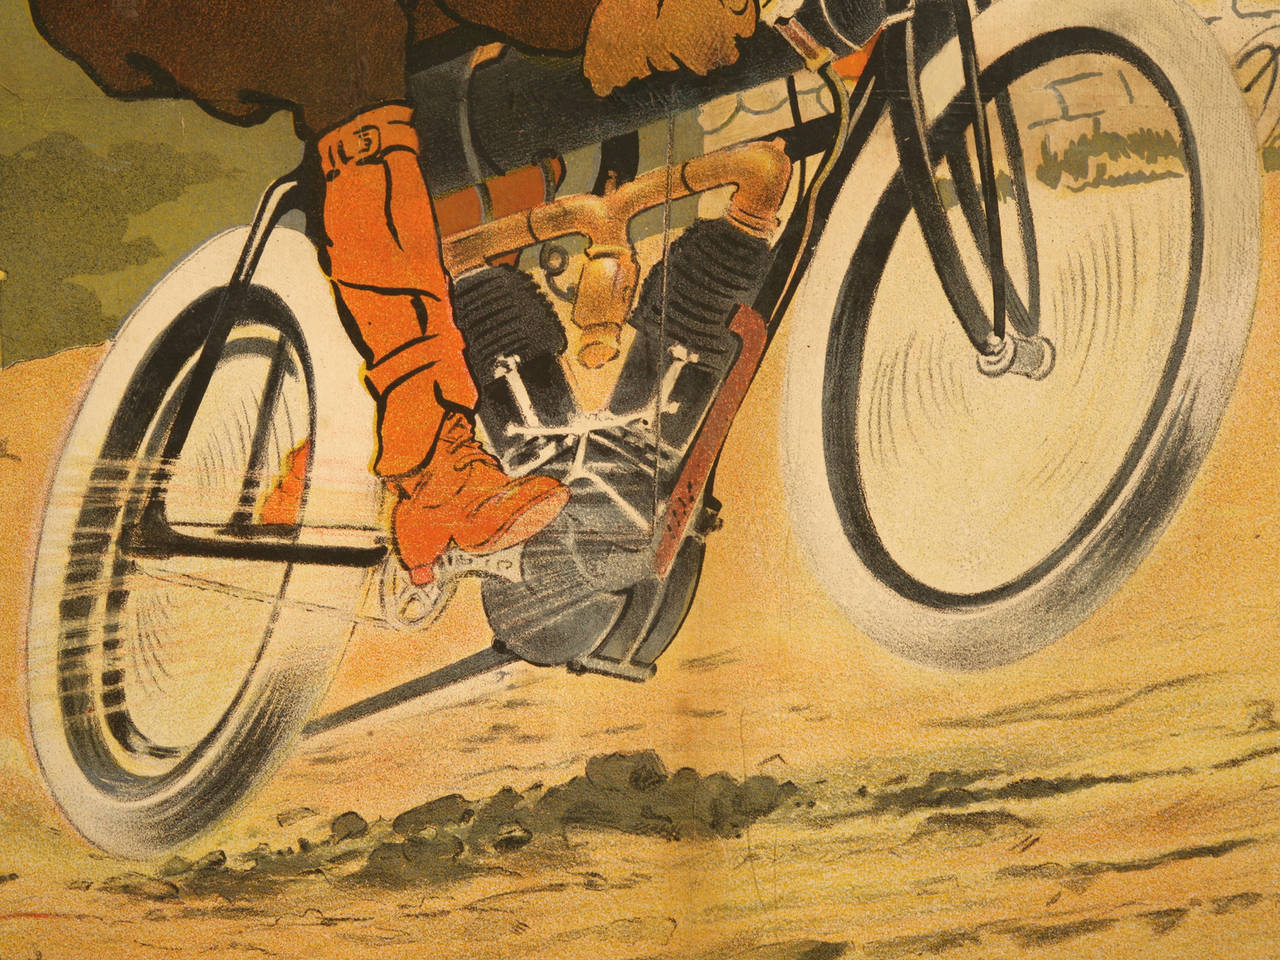 Early 20th Century Motorcycle Poster by Walter Thor, circa 1910